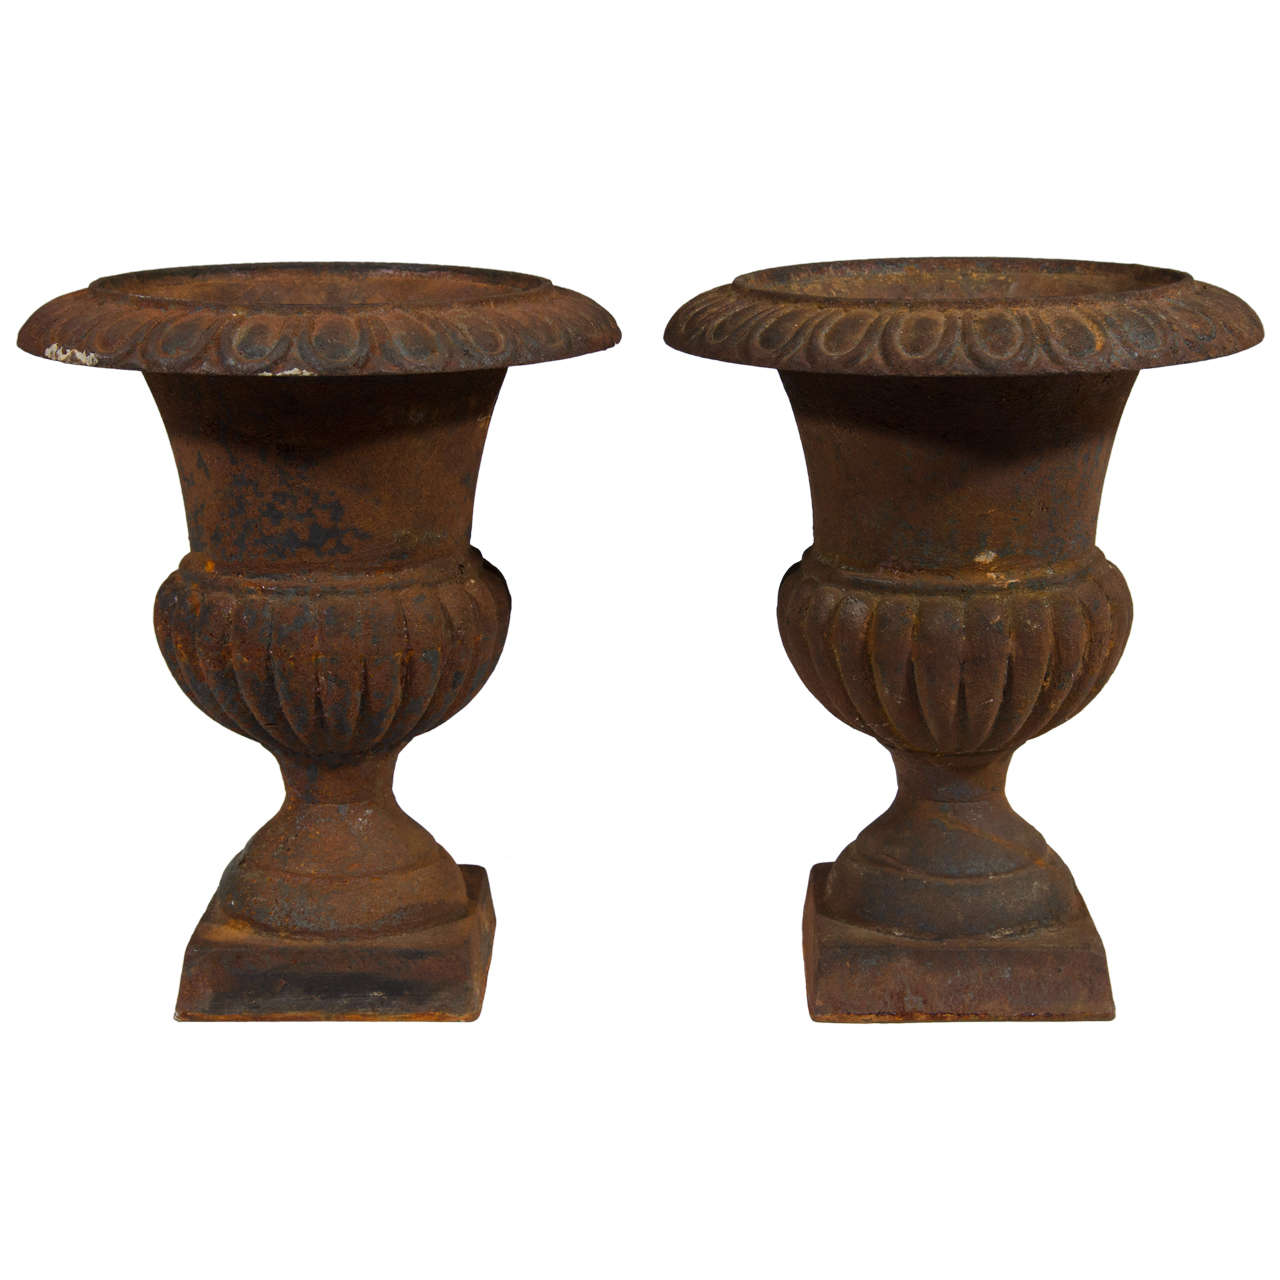 Neoclassical Iron Urns Flower or Plant Planters Jardinières, Pair